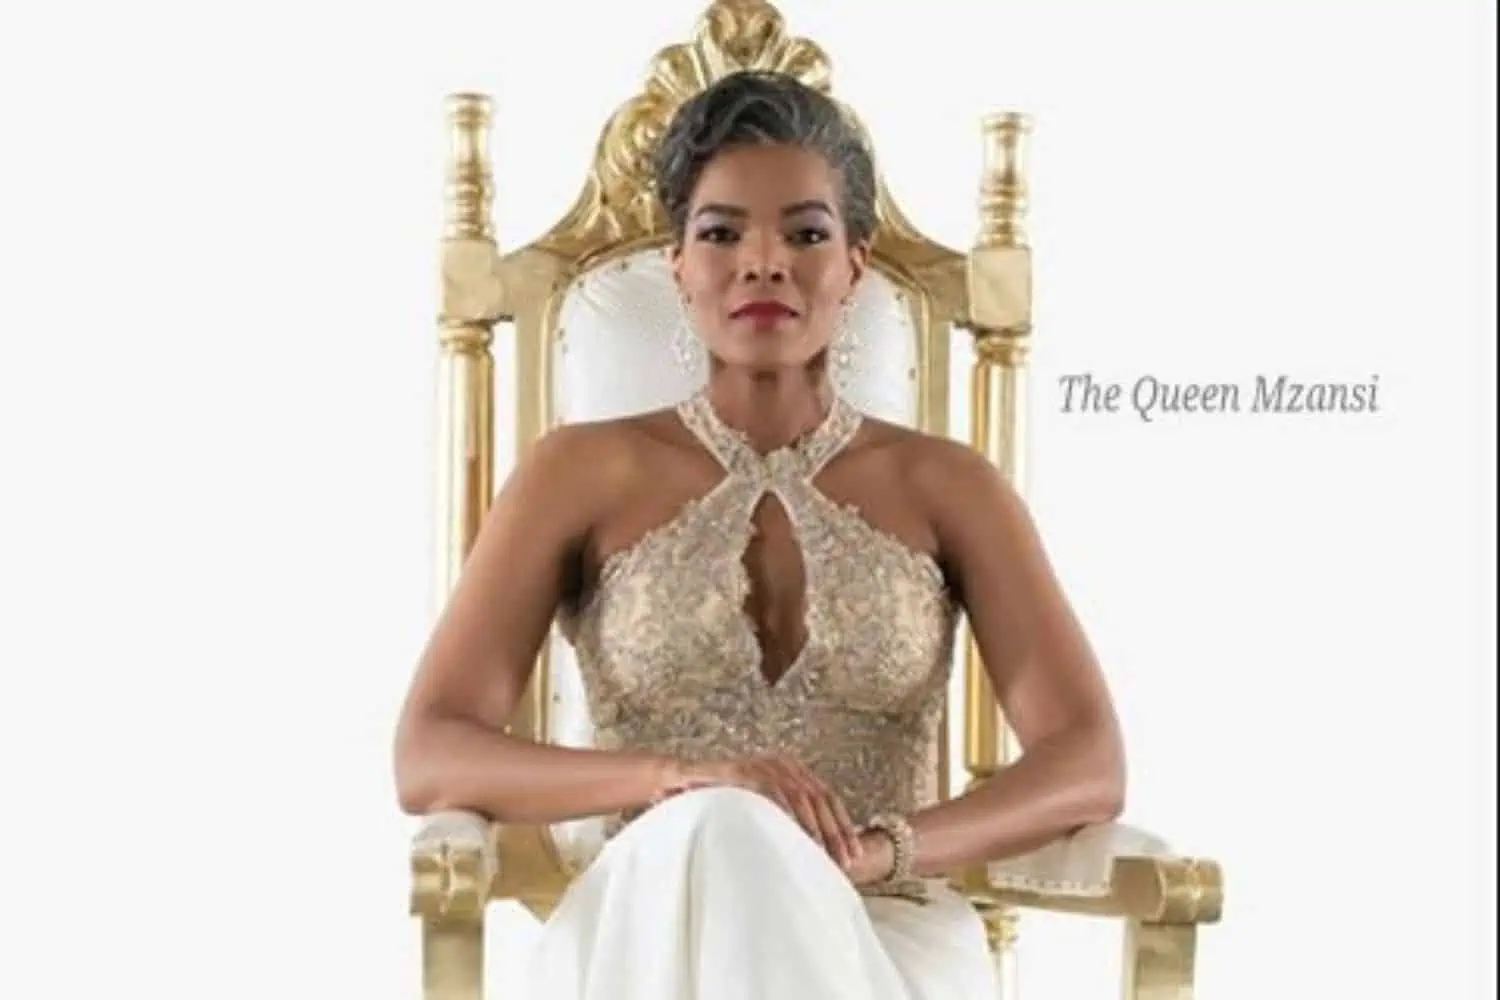 Mzansi Magic The Queen reportedly cancelled